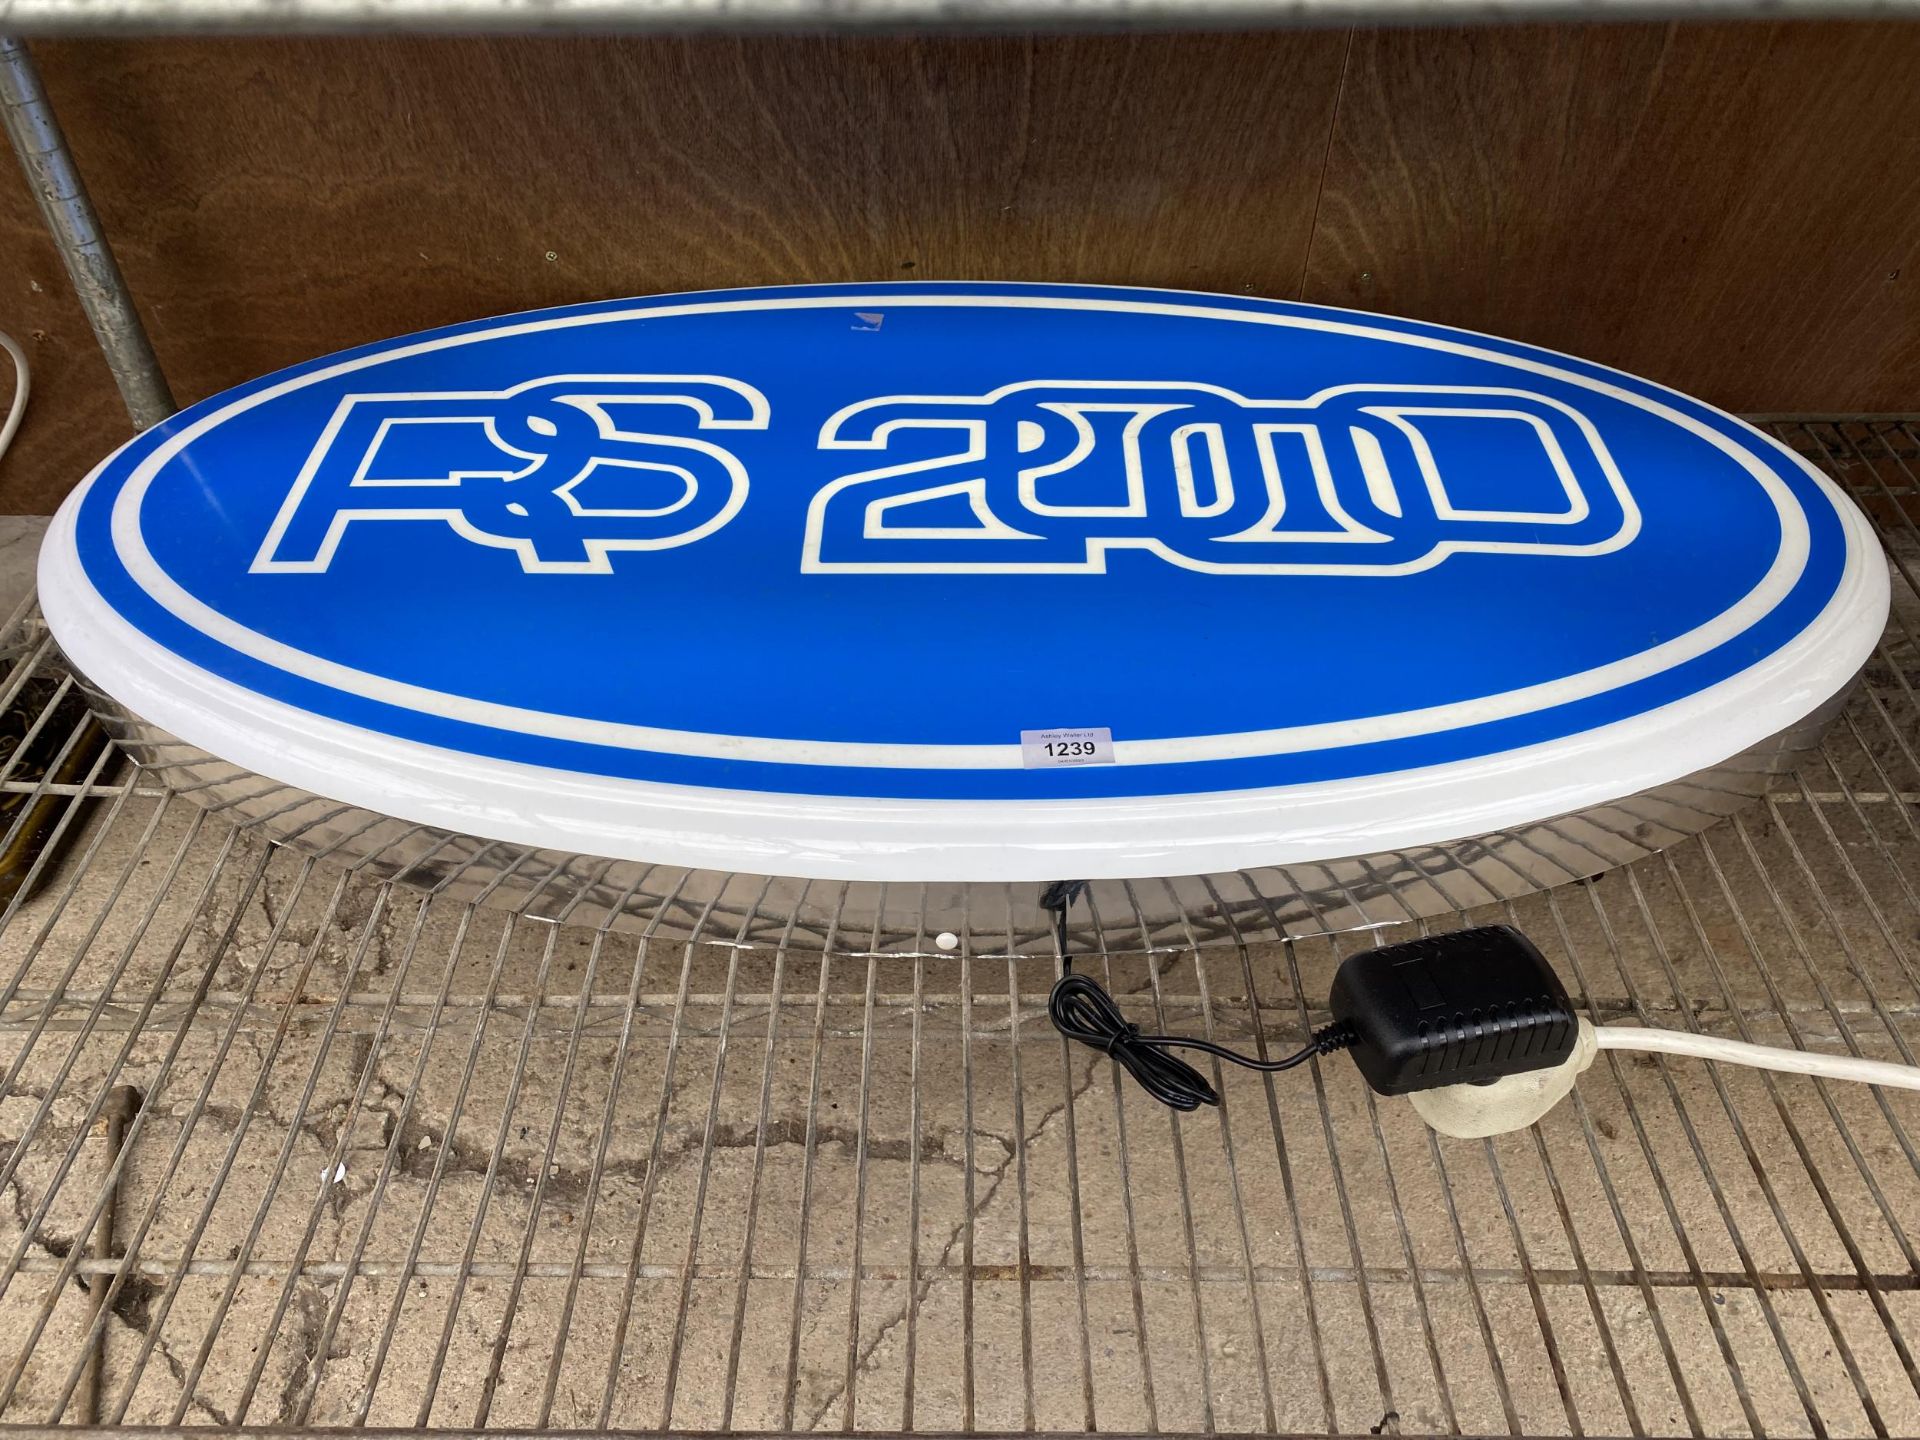 A LARGE OVAL RS2000 ILLUMINATED LIGHT BOX SIGN - WORKING ORDER AT TIME OF CATALOGUING. WIDTH 86CM,